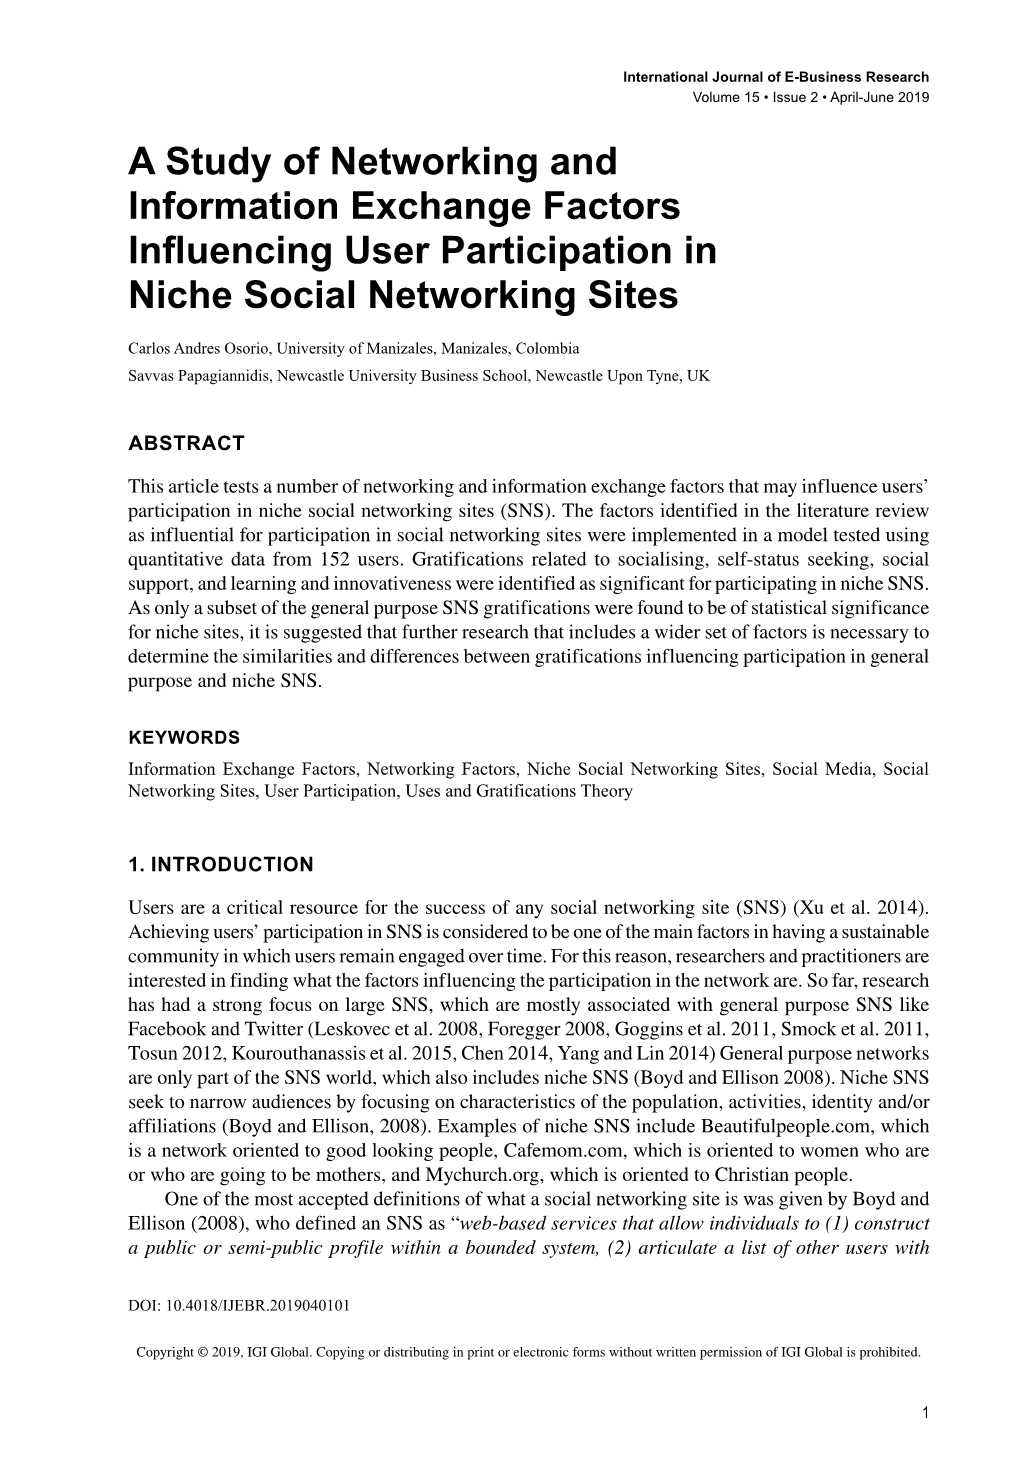 A Study of Networking and Information Exchange Factors Influencing User Participation in Niche Social Networking Sites